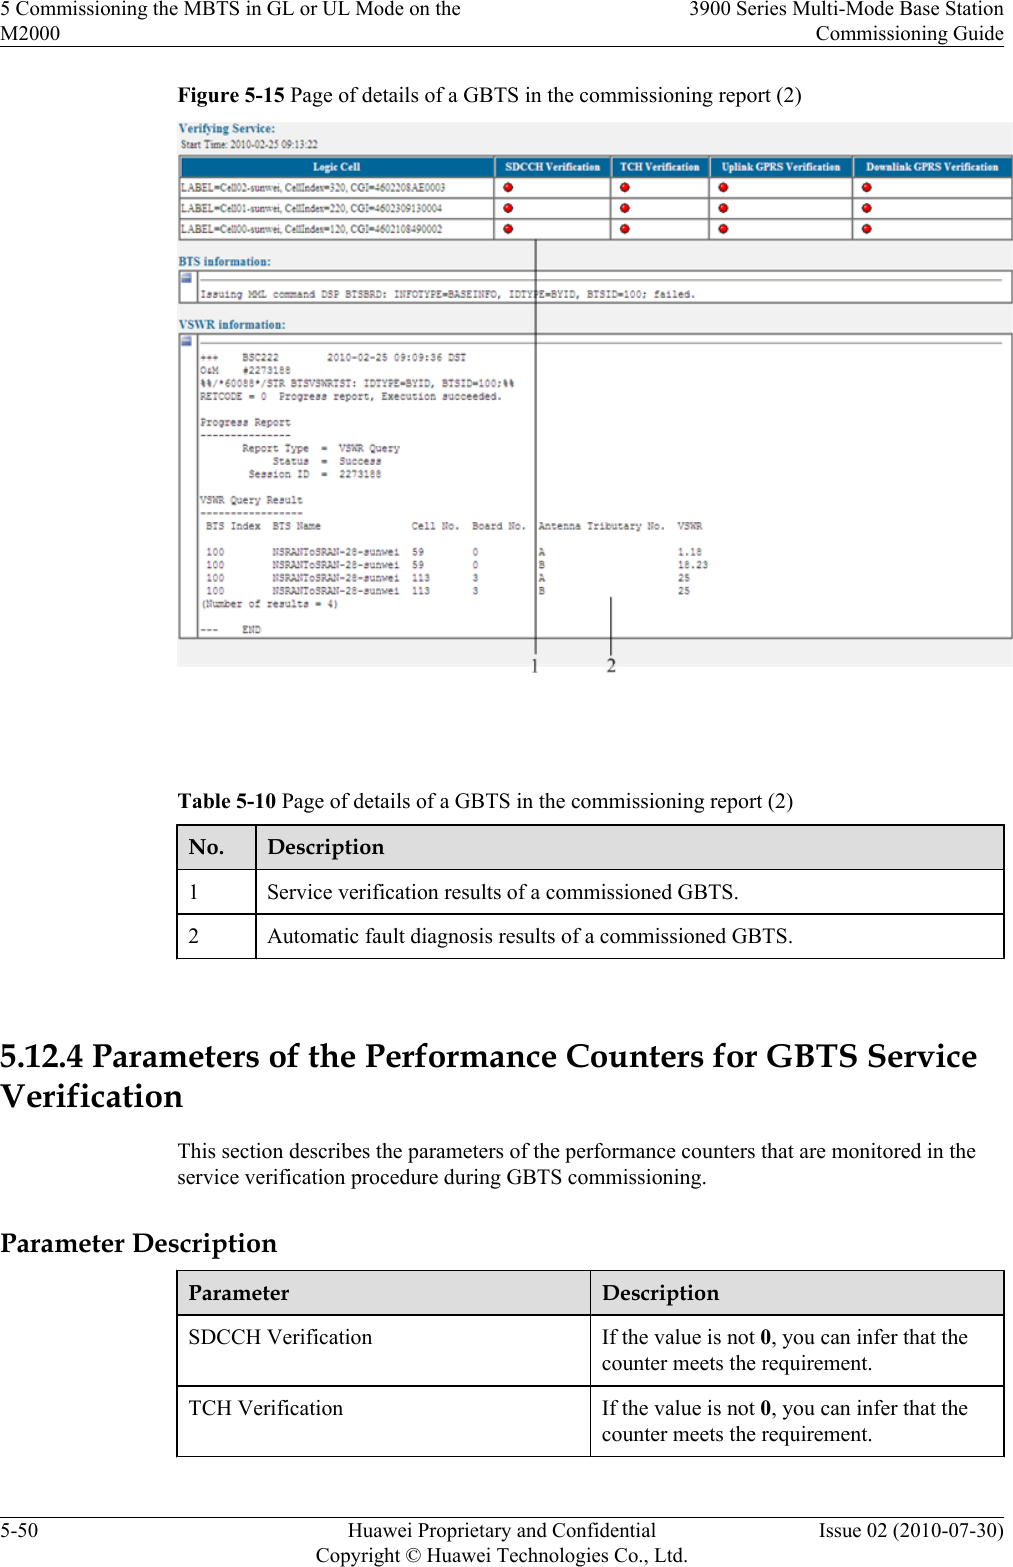 Figure 5-15 Page of details of a GBTS in the commissioning report (2) Table 5-10 Page of details of a GBTS in the commissioning report (2)No. Description1Service verification results of a commissioned GBTS.2 Automatic fault diagnosis results of a commissioned GBTS. 5.12.4 Parameters of the Performance Counters for GBTS ServiceVerificationThis section describes the parameters of the performance counters that are monitored in theservice verification procedure during GBTS commissioning.Parameter DescriptionParameter DescriptionSDCCH Verification If the value is not 0, you can infer that thecounter meets the requirement.TCH Verification If the value is not 0, you can infer that thecounter meets the requirement.5 Commissioning the MBTS in GL or UL Mode on theM20003900 Series Multi-Mode Base StationCommissioning Guide5-50 Huawei Proprietary and ConfidentialCopyright © Huawei Technologies Co., Ltd.Issue 02 (2010-07-30)